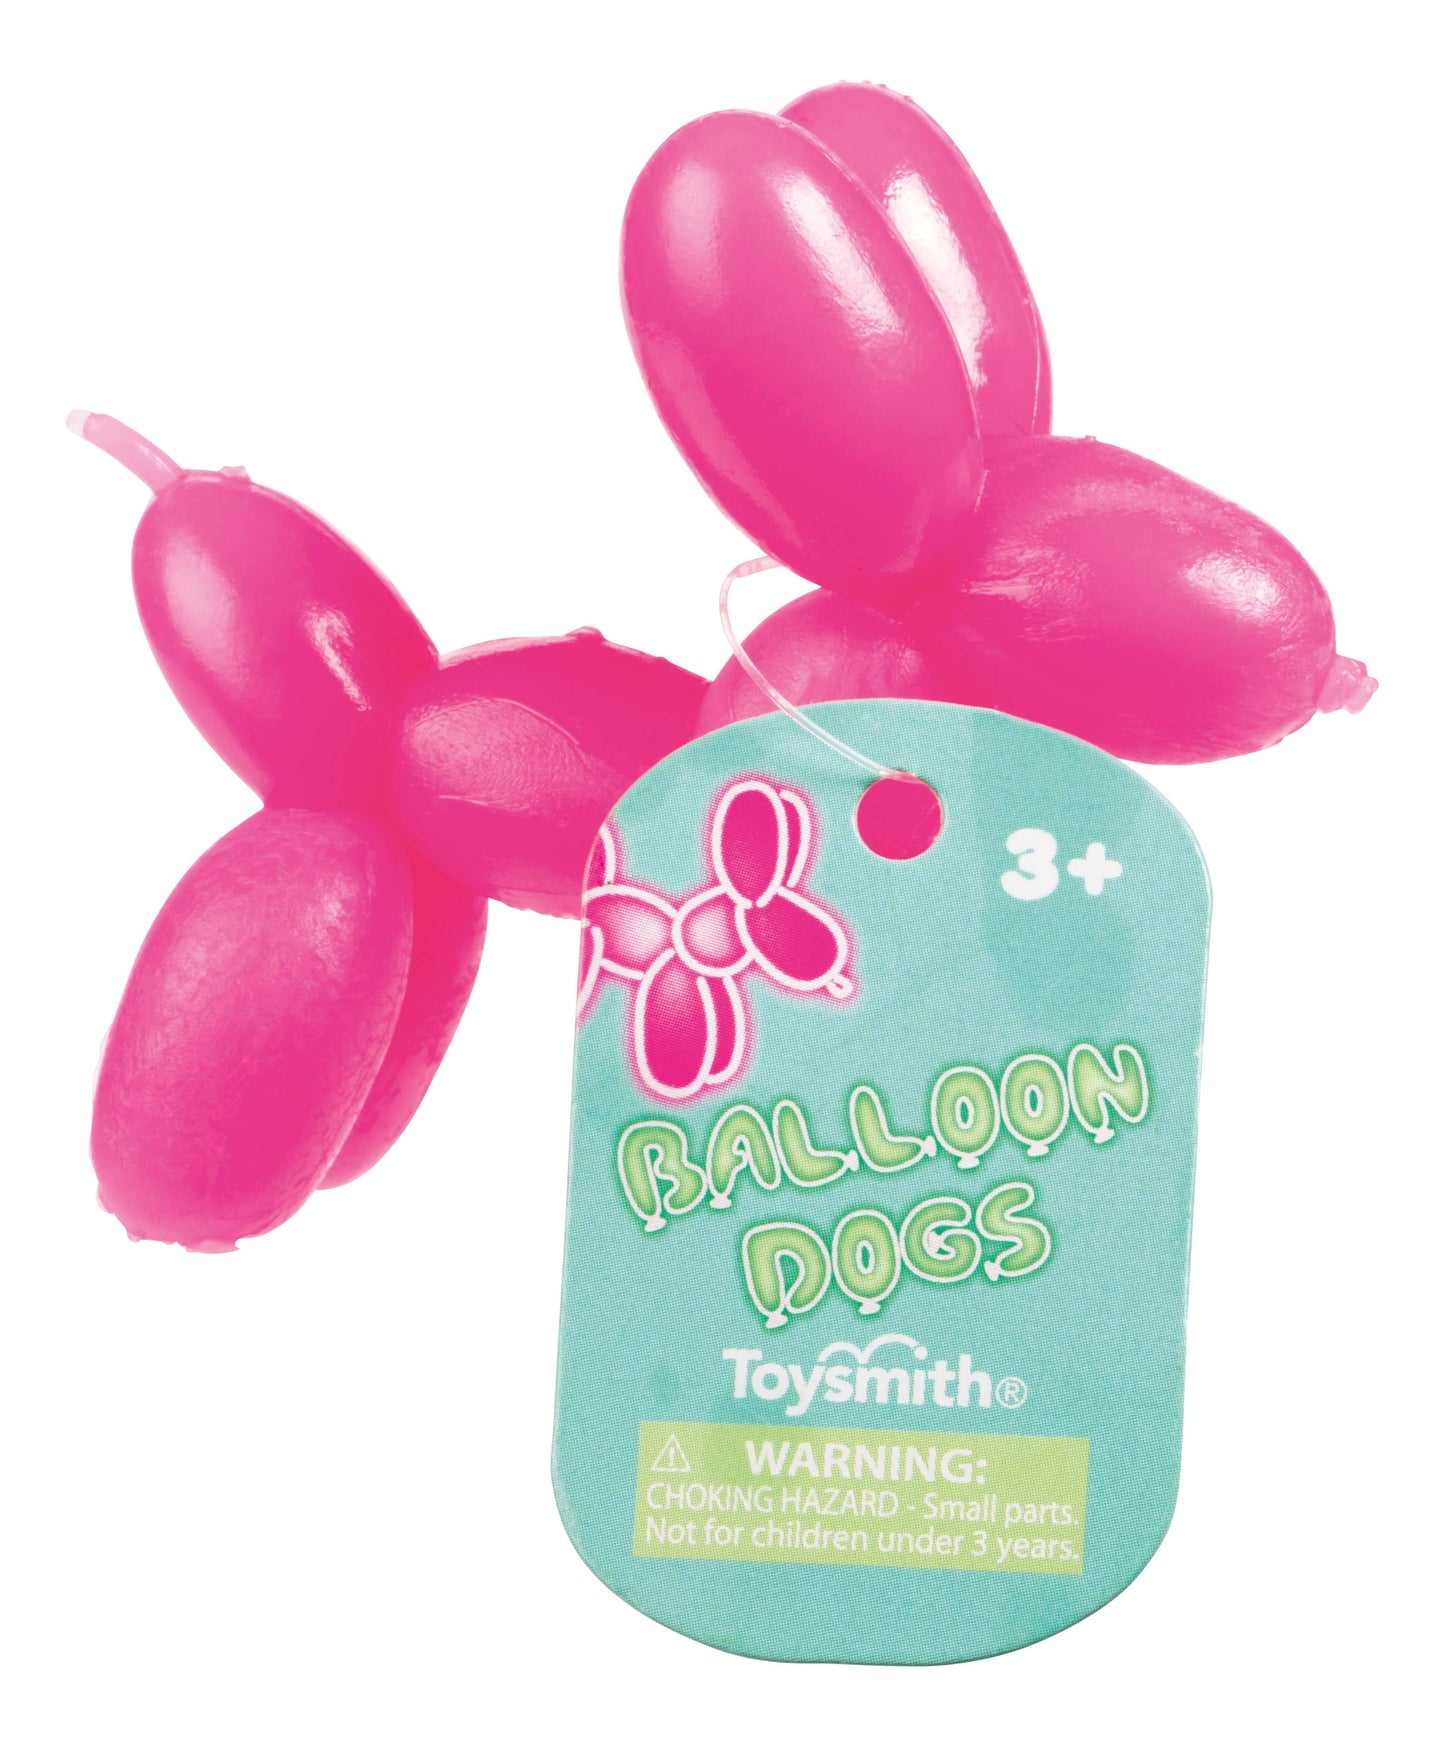 Stretchy Balloon Dogs (Multiple Colors Available)